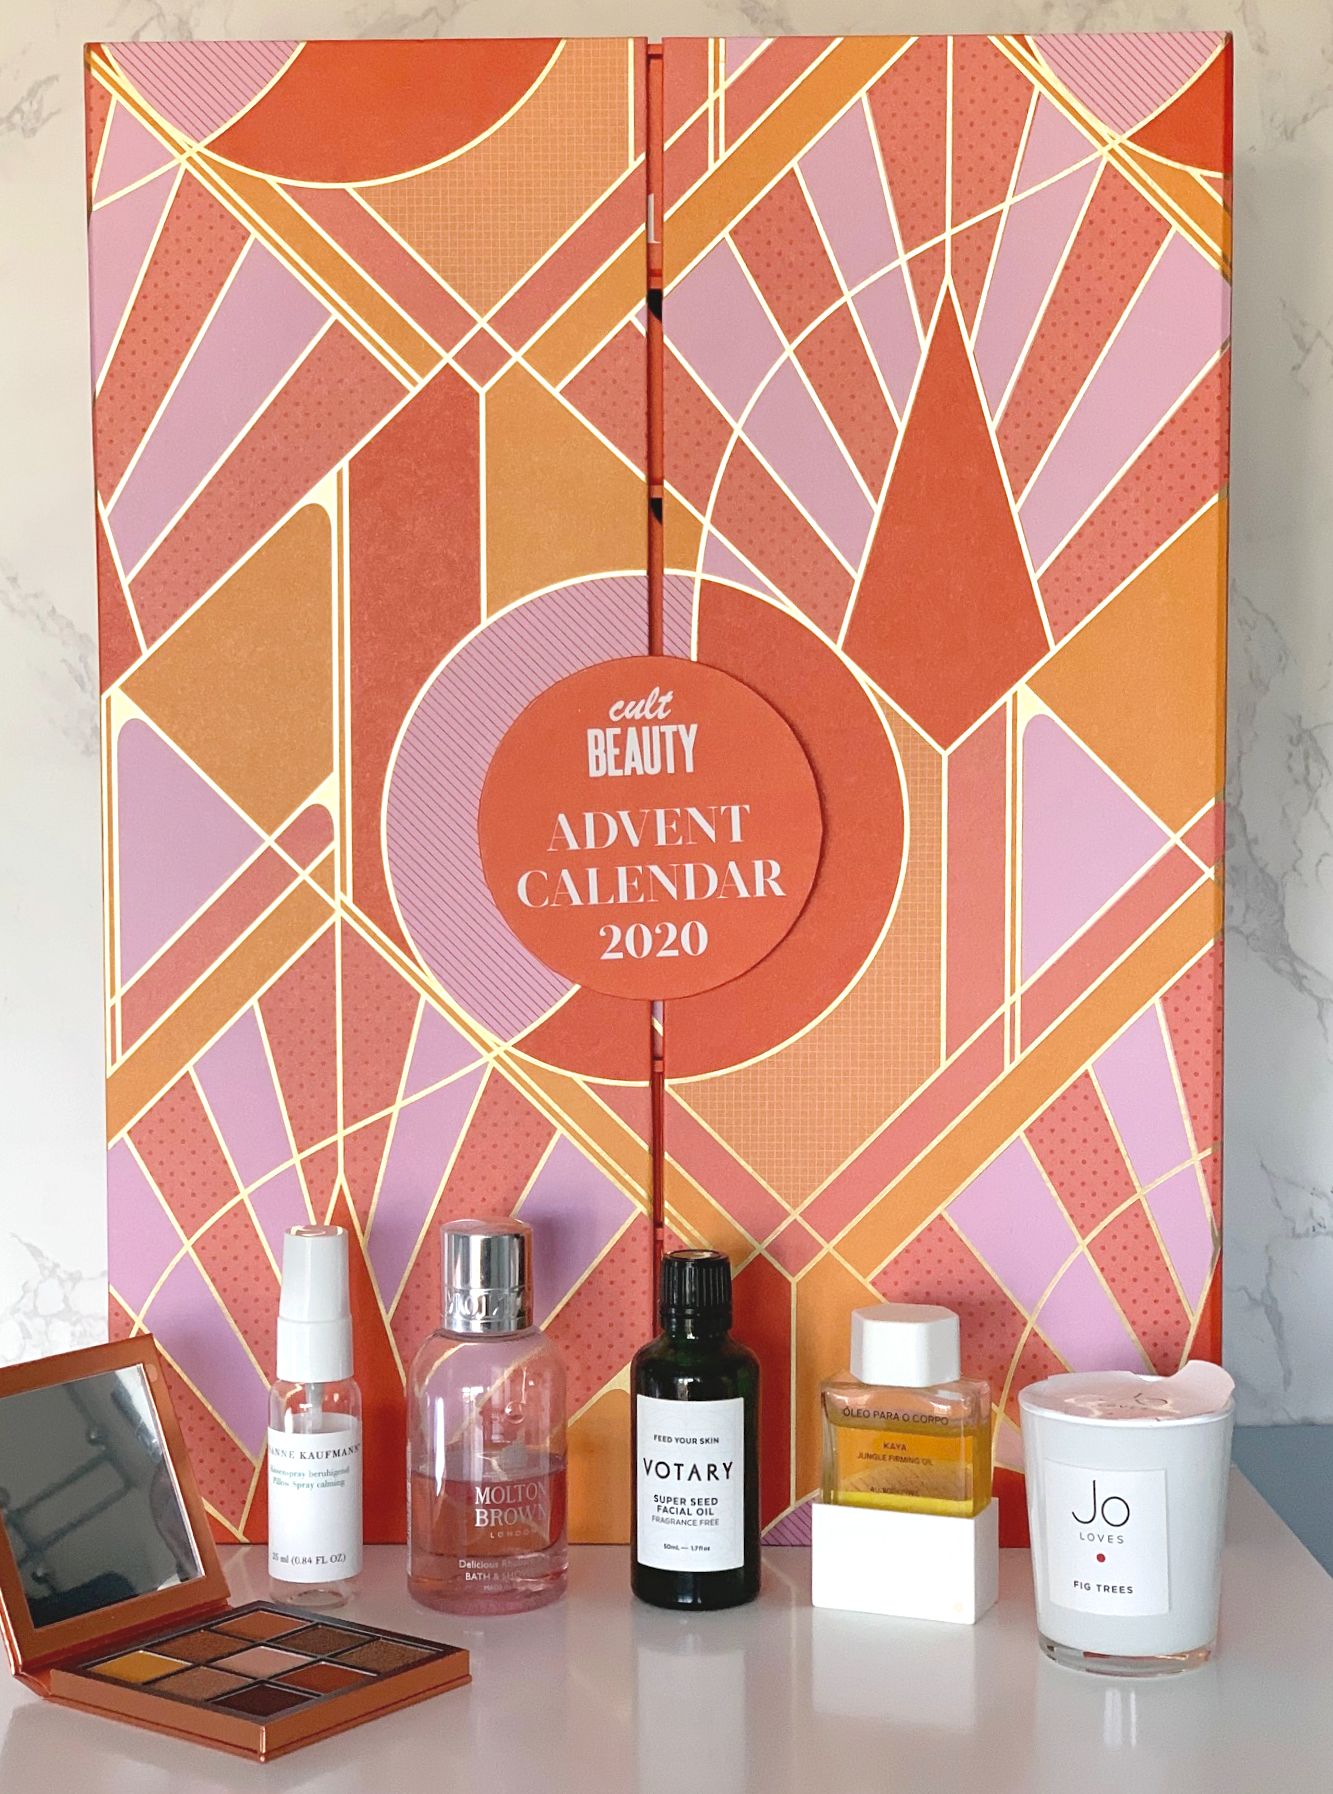 My six favourite products from the Cult Beauty Advent Calendar 2020